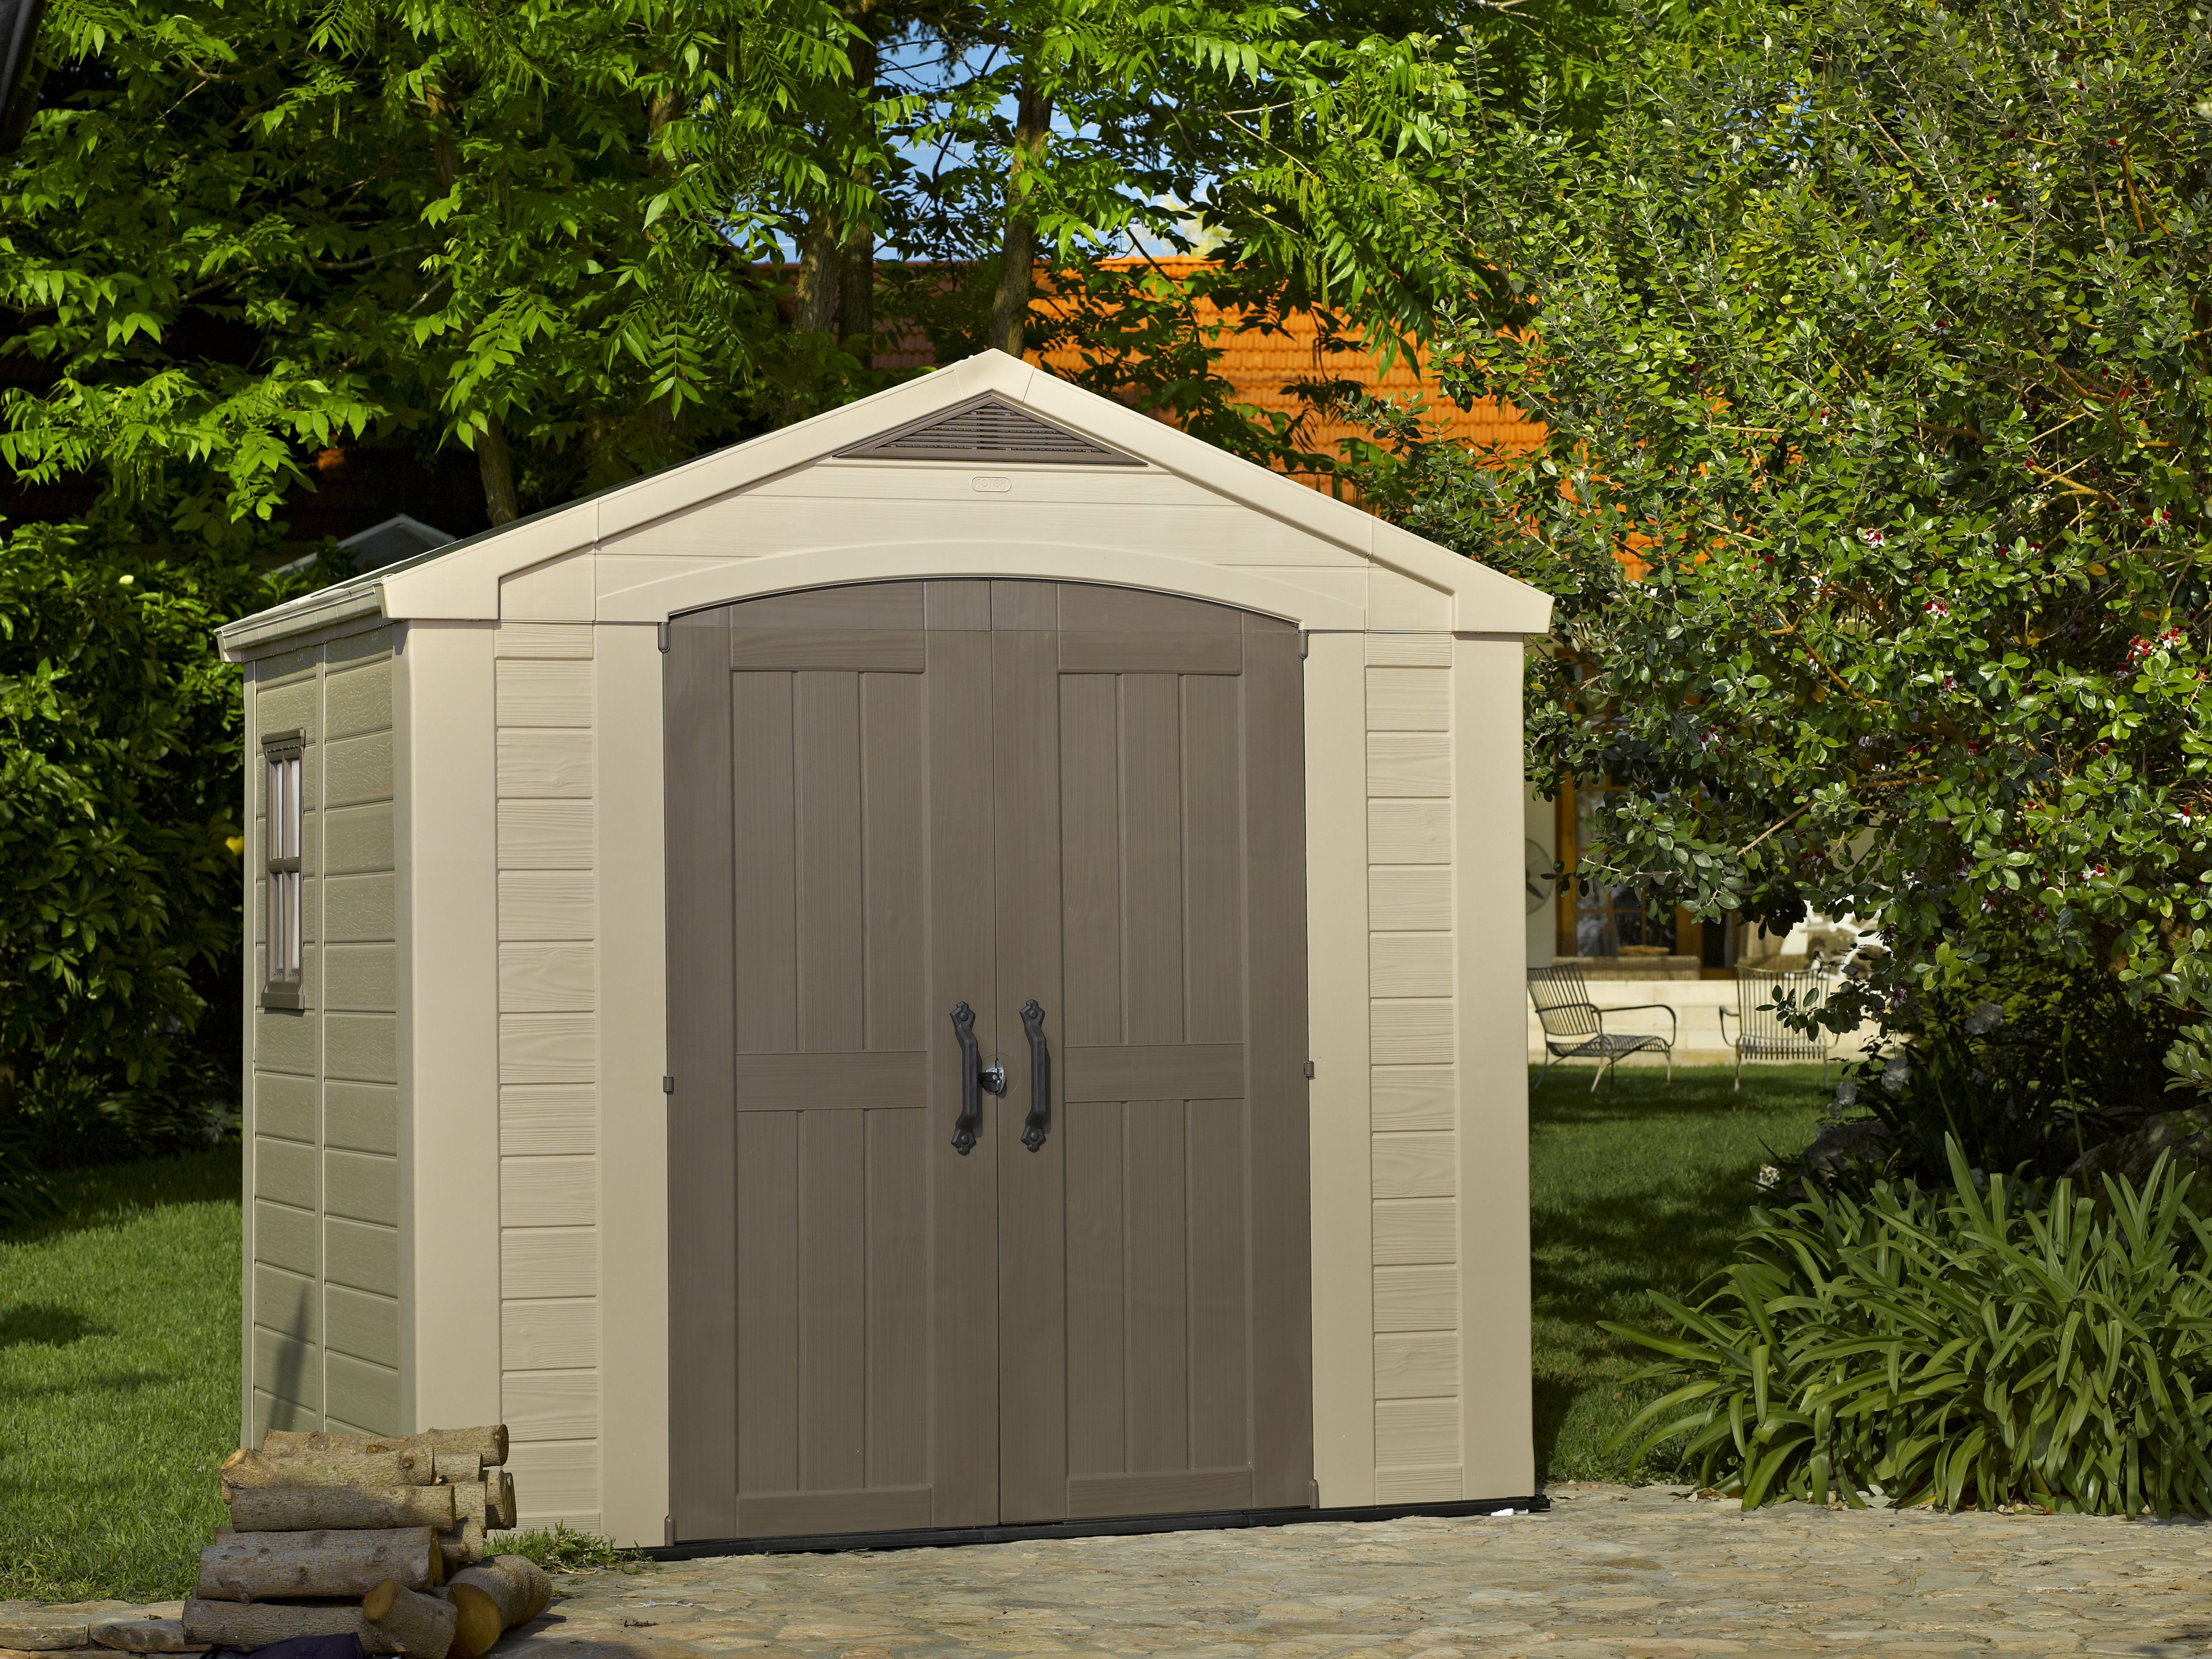 Keter Factor 8x6 Apex Plastic Shed Departments Diy At Bandq